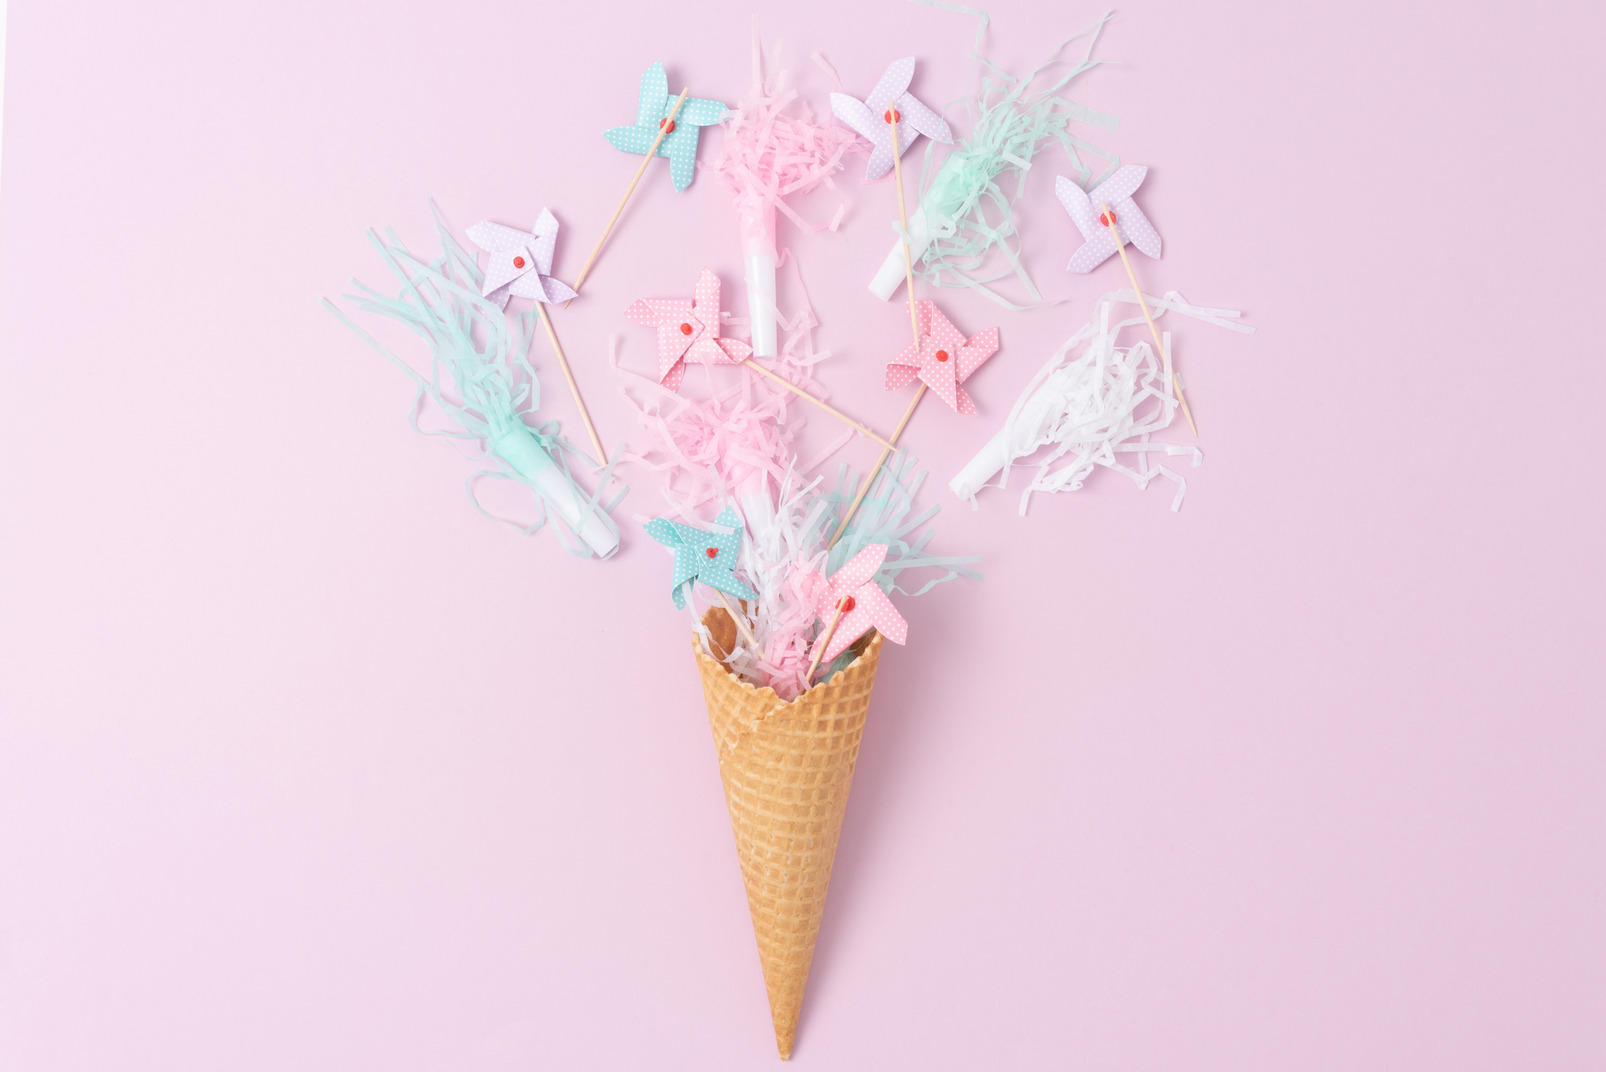 Pastel pinwheels and party horns in an ice cream cone